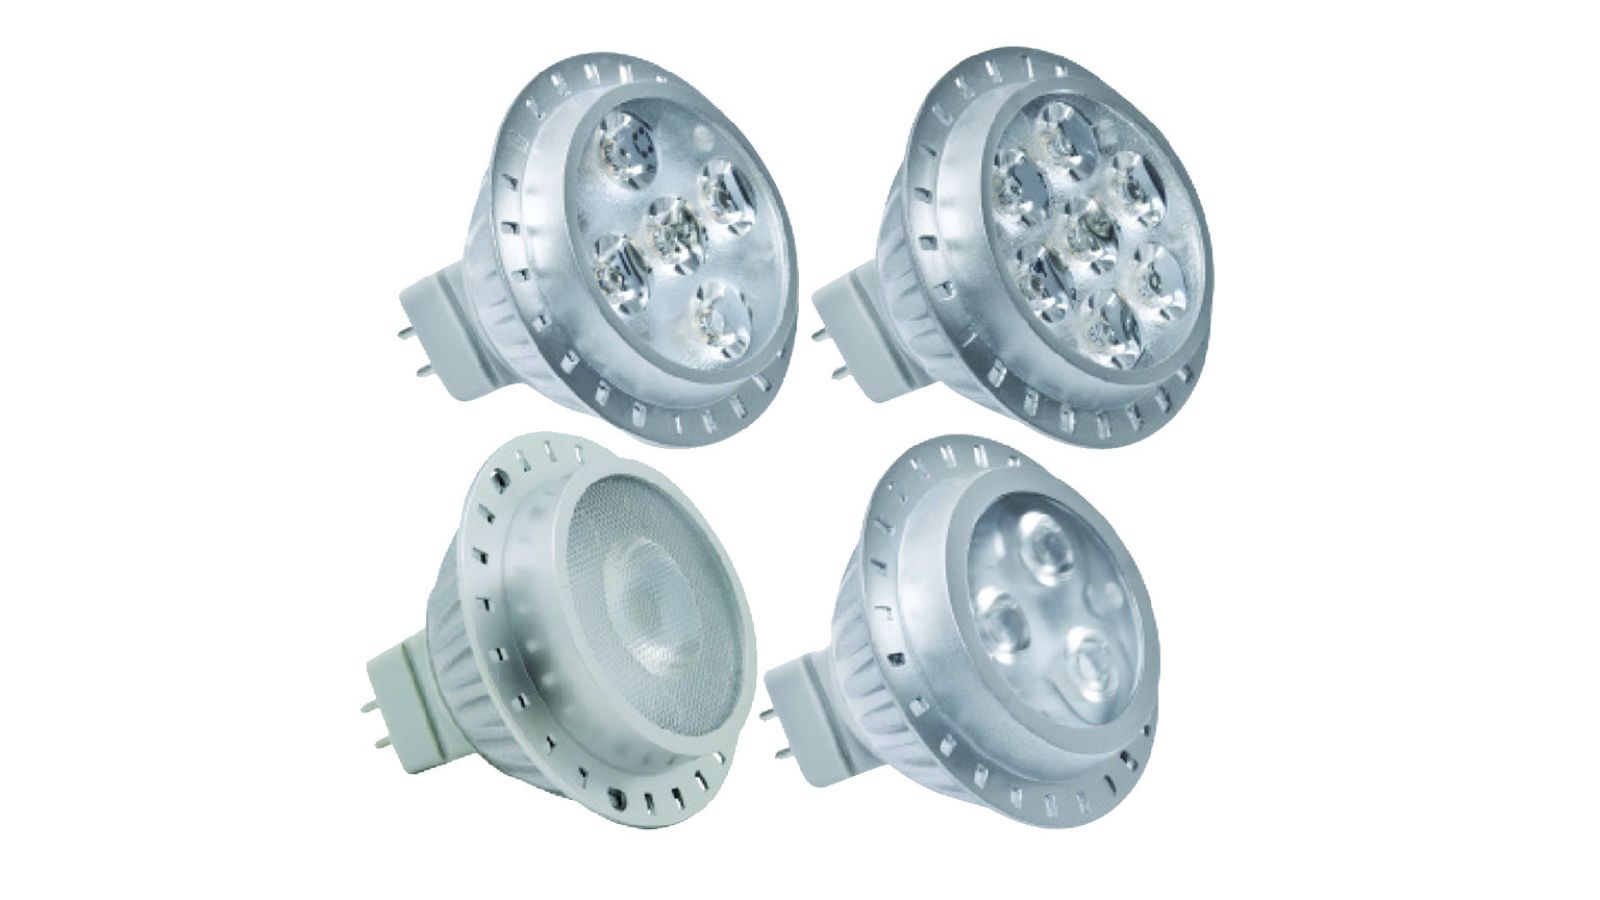 ProLED MR16 Series Lamps